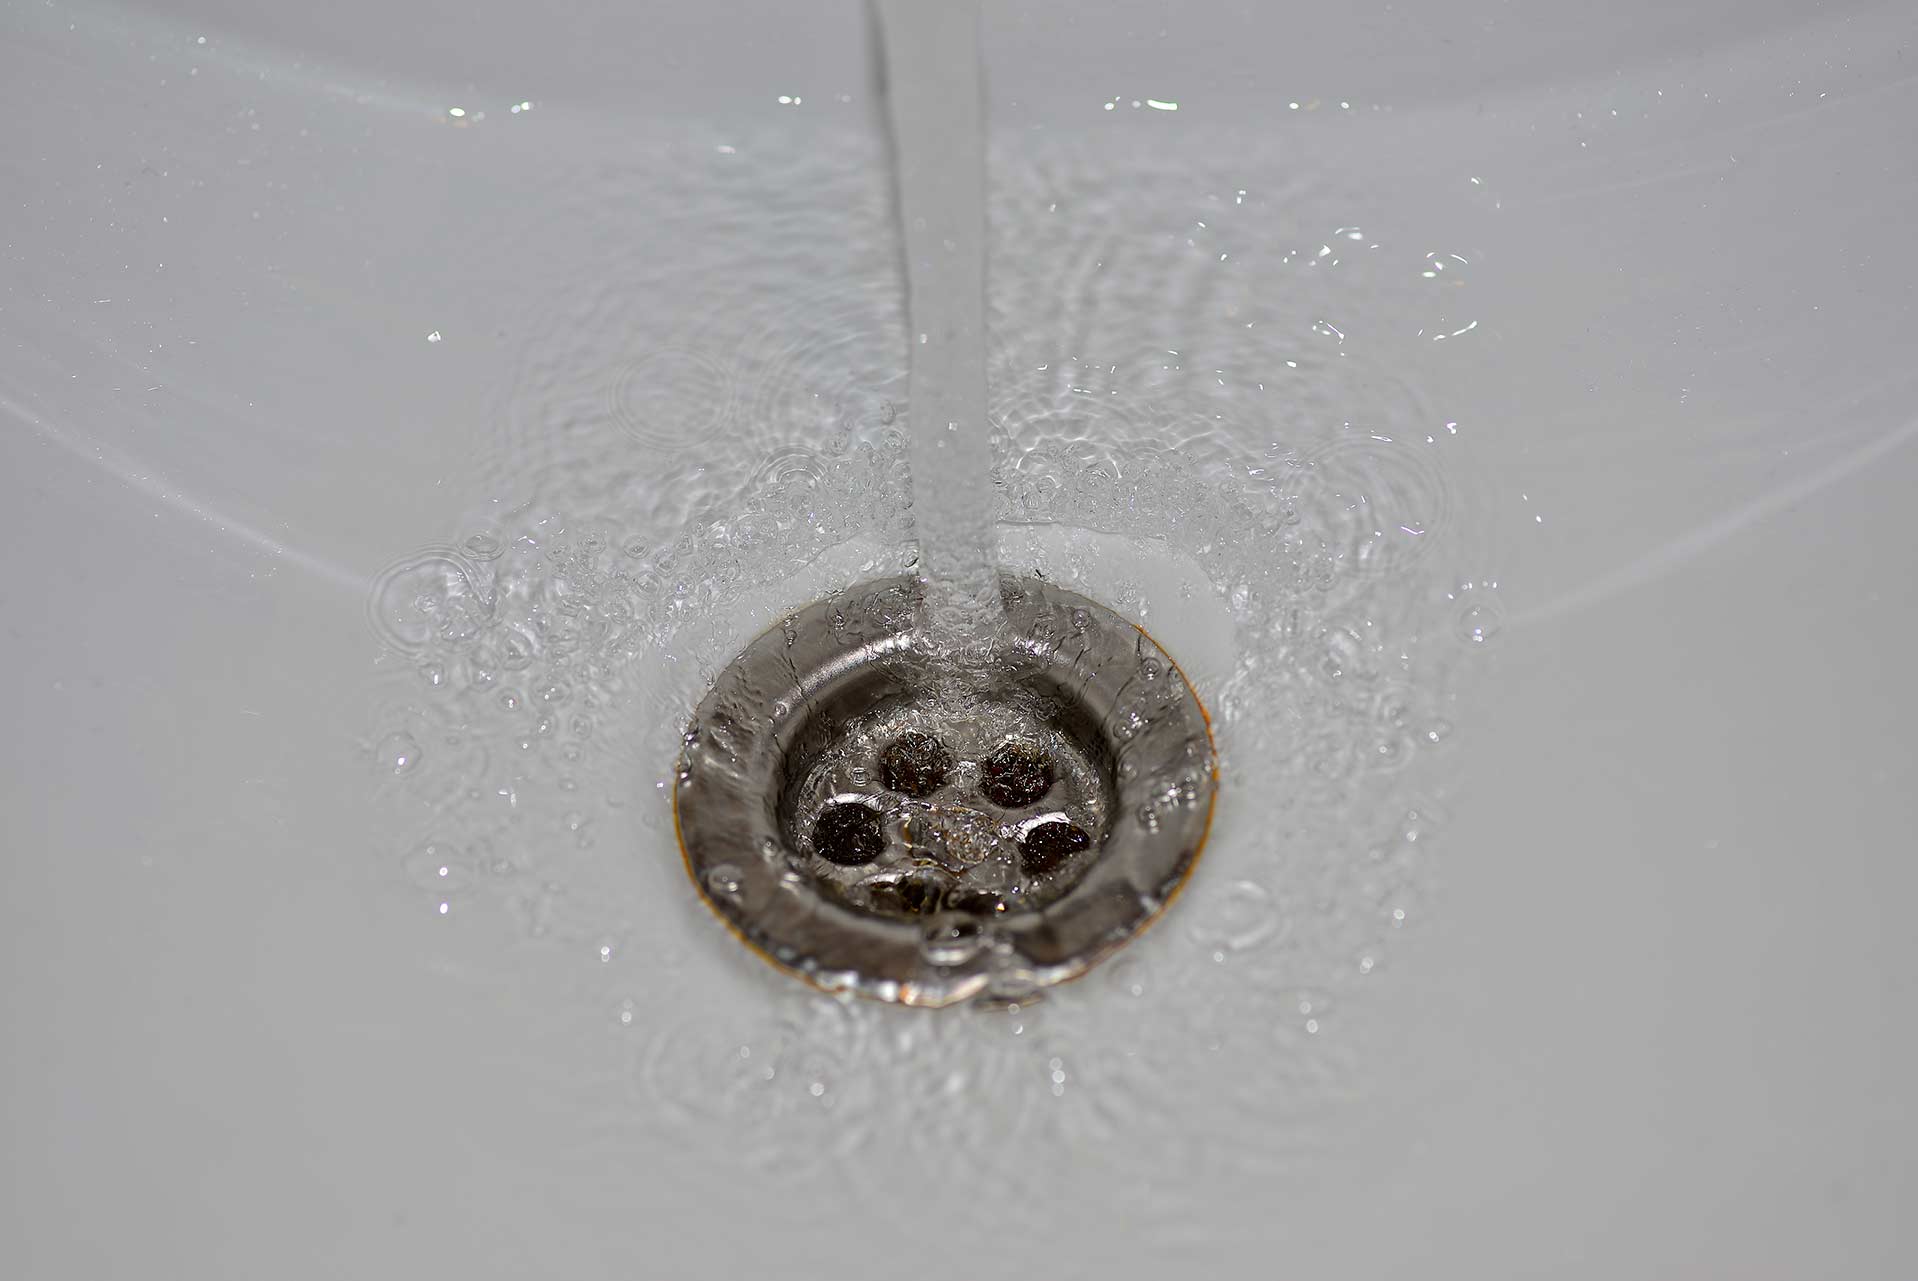 A2B Drains provides services to unblock blocked sinks and drains for properties in Surbiton.